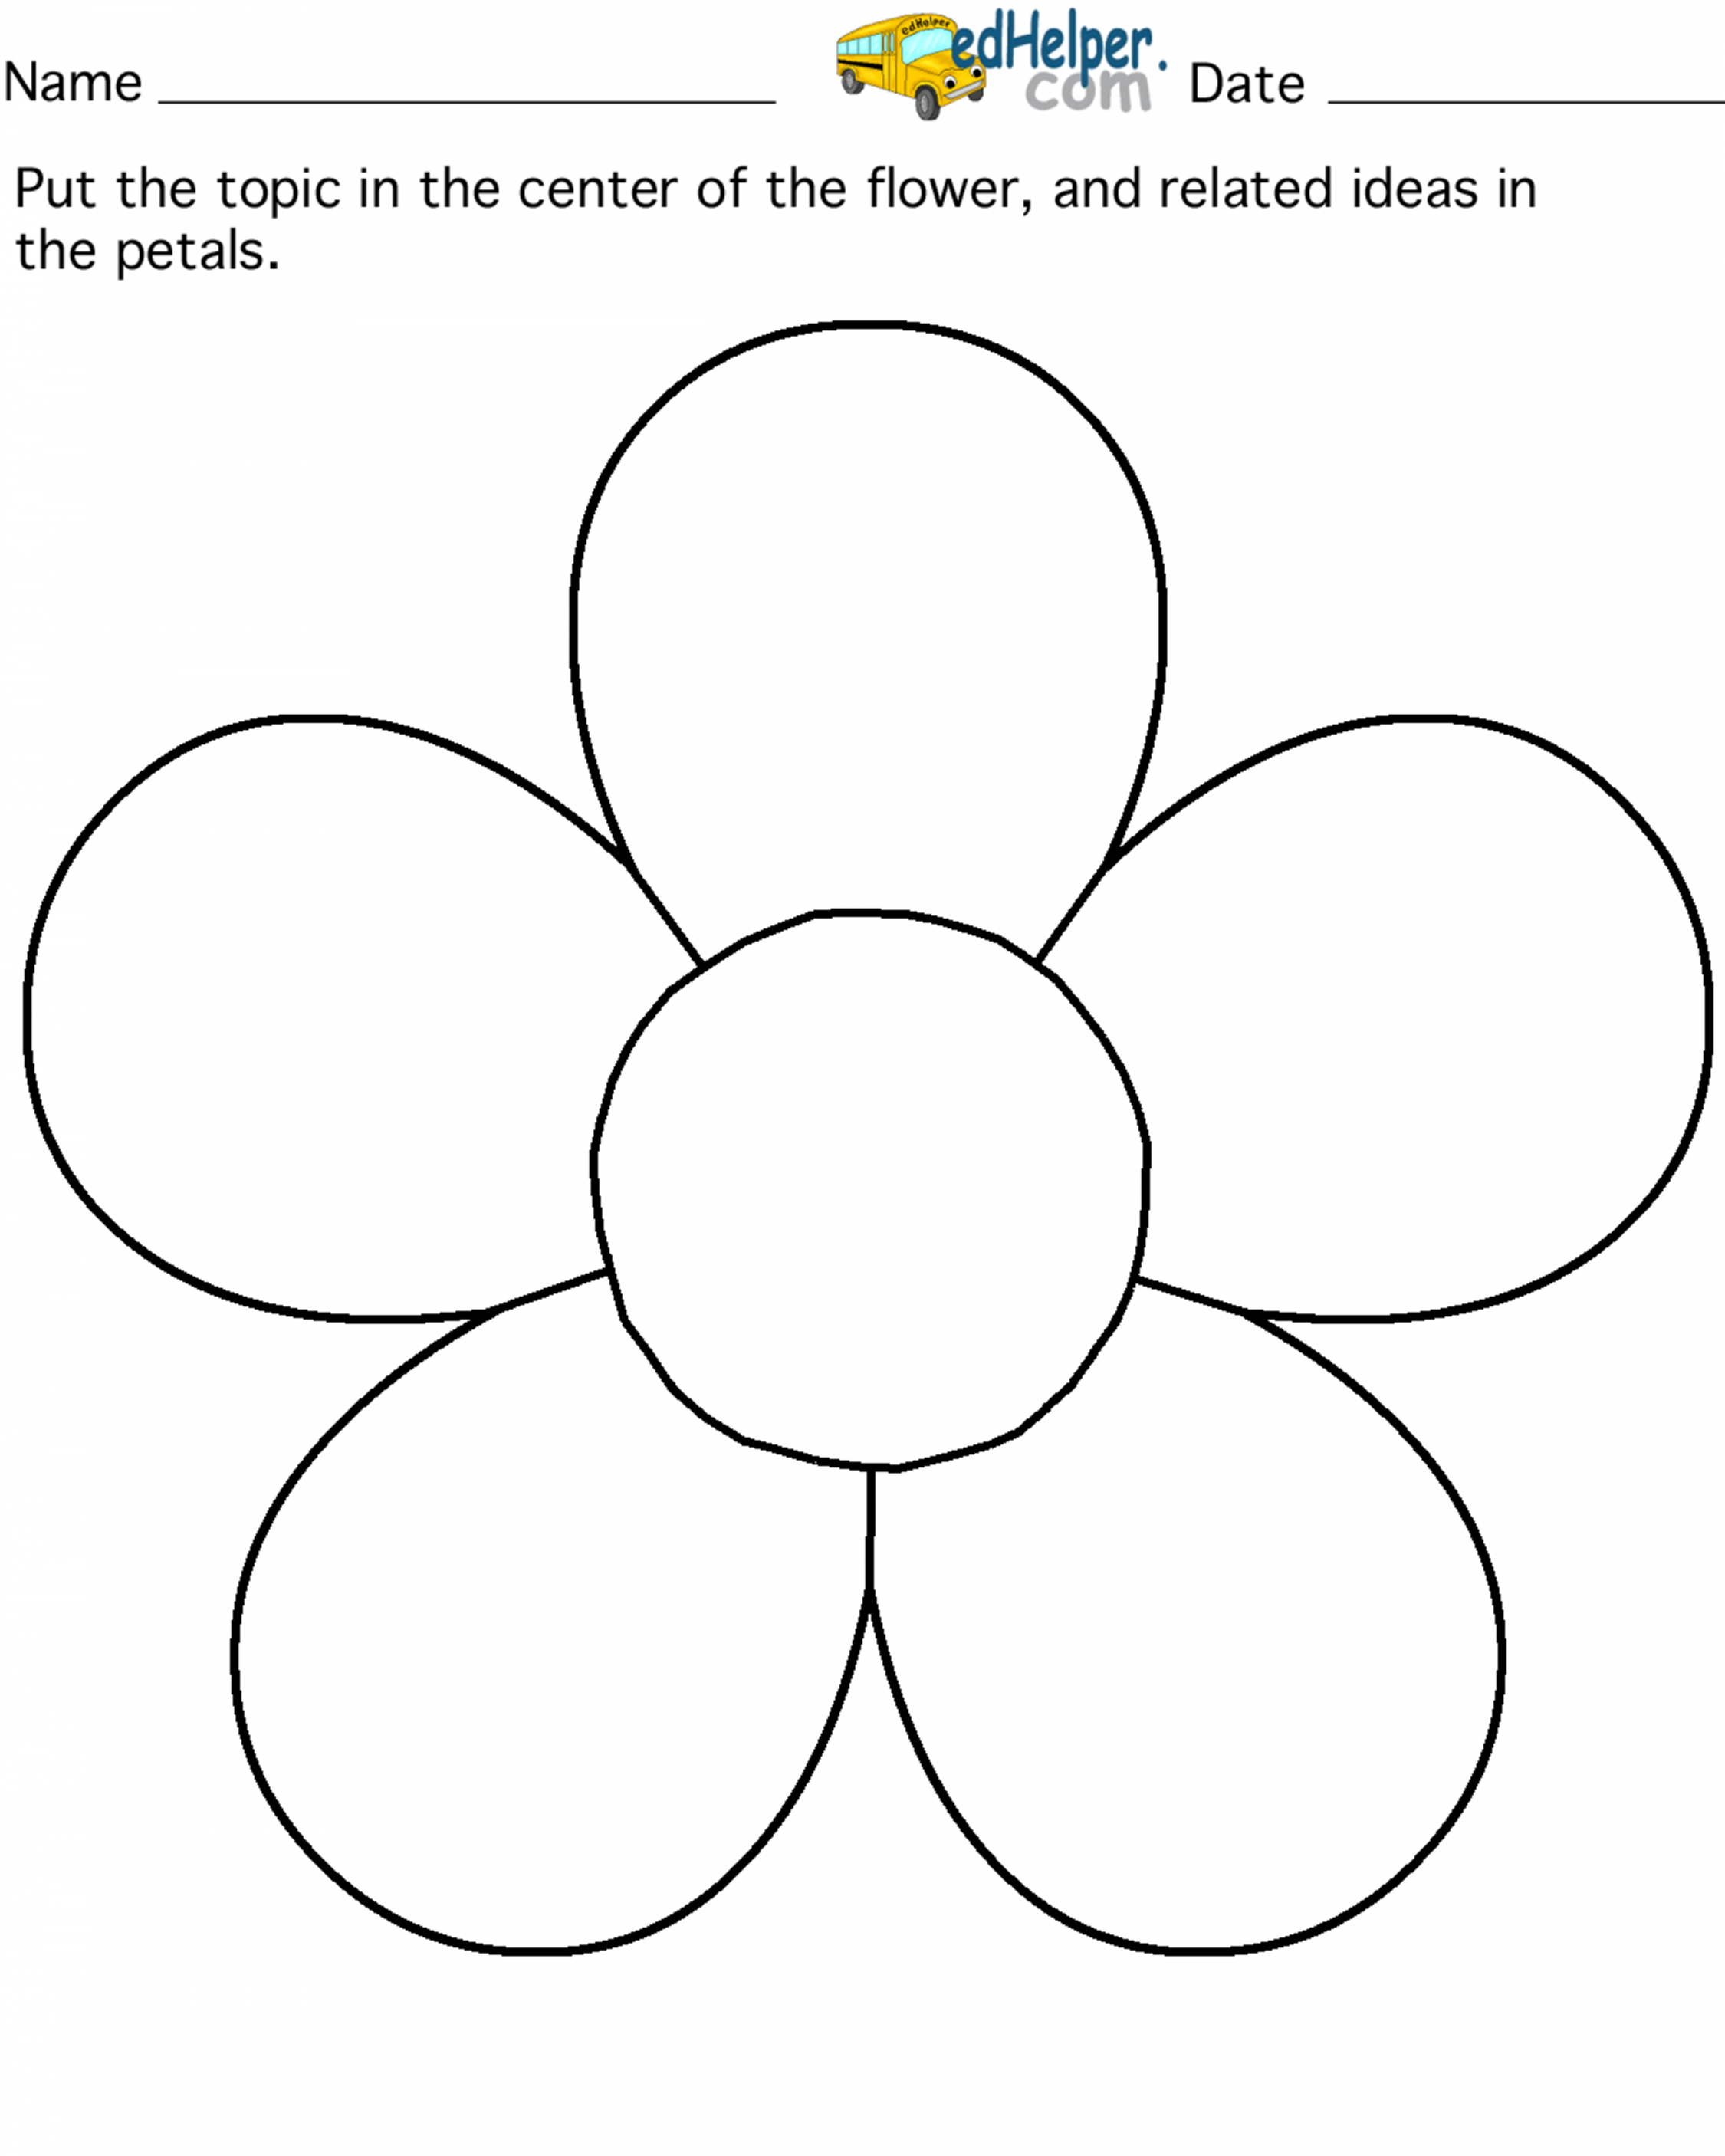 petal flower pattern template - Clipground  Flower template  - FREE Printables - 5 Petal Flower Template Free Printable